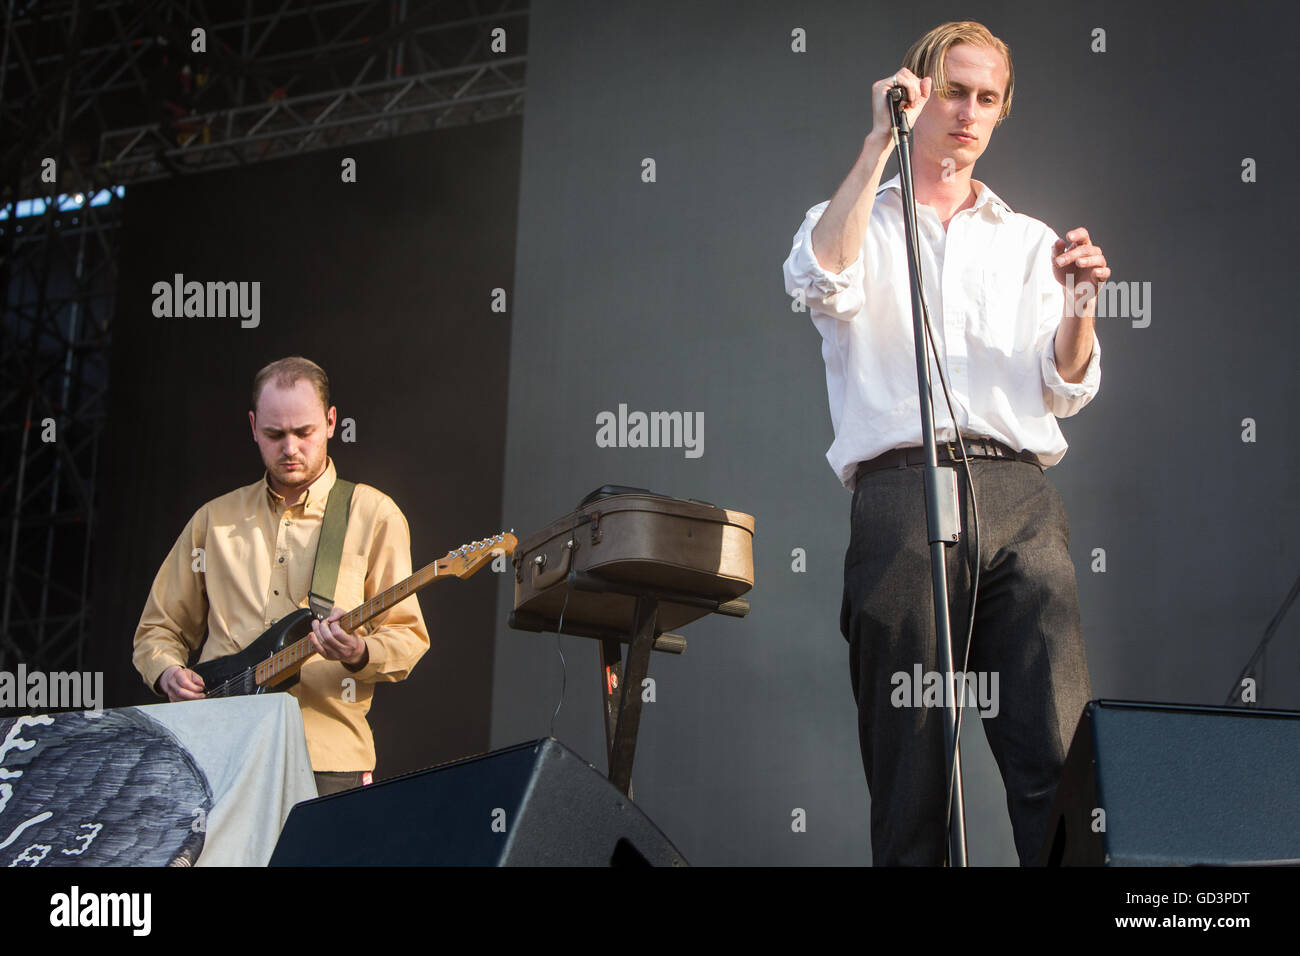 Monza Italy. 10 July 2016. The English rock band EAGULLS performs live on  stage at Parco di Monza during the I-Days Festival Credit: Rodolfo  Sassano/Alamy Live News Stock Photo - Alamy